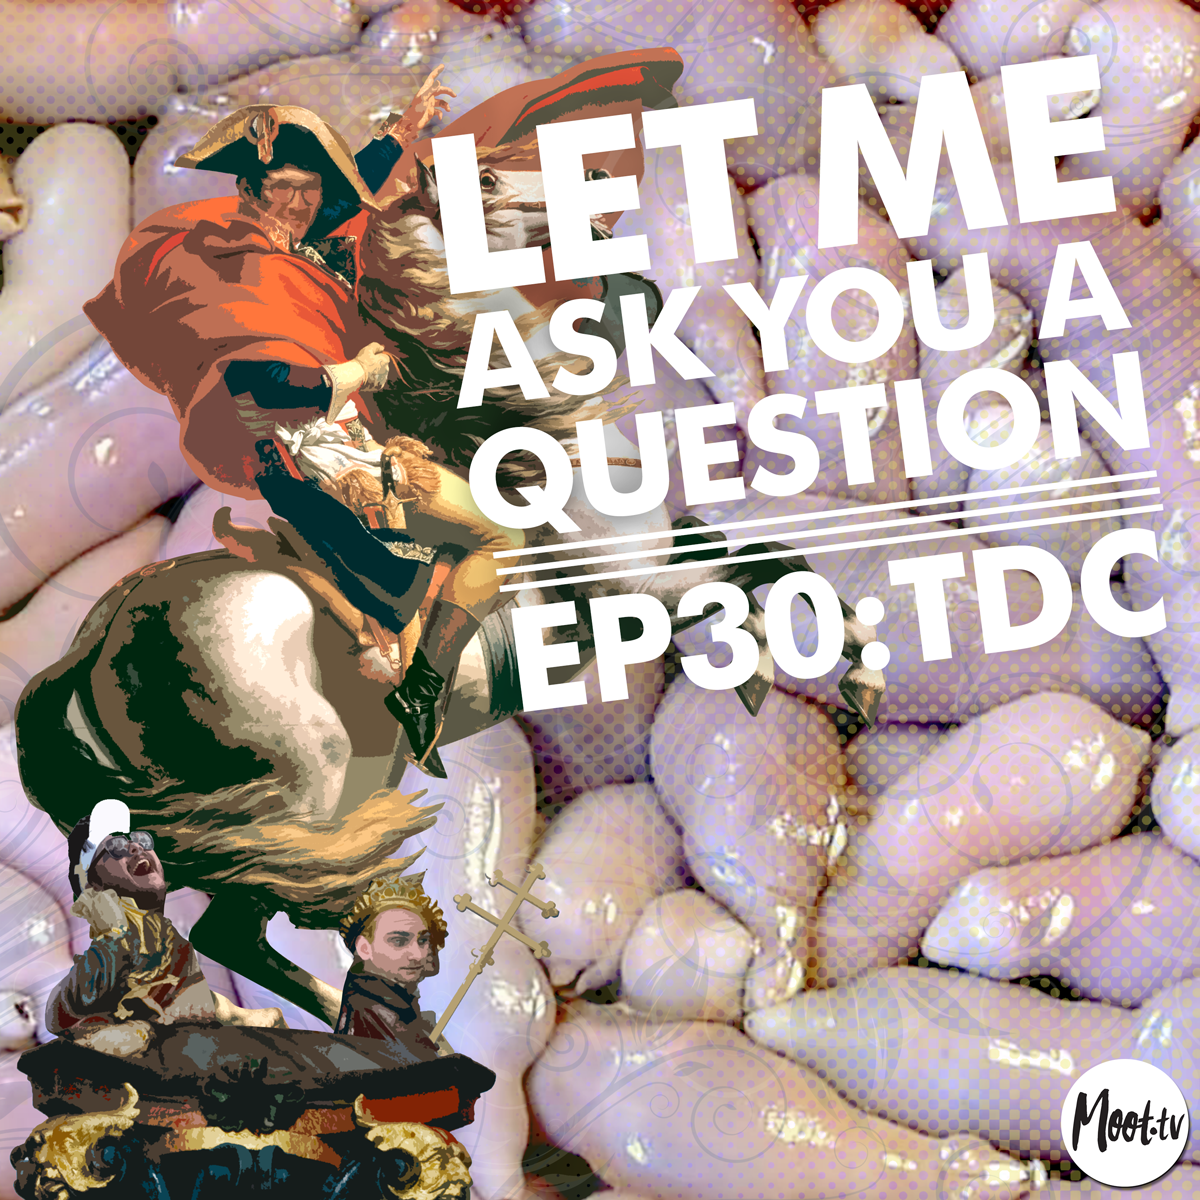 Let Me Ask You A Question Ep30: TDC